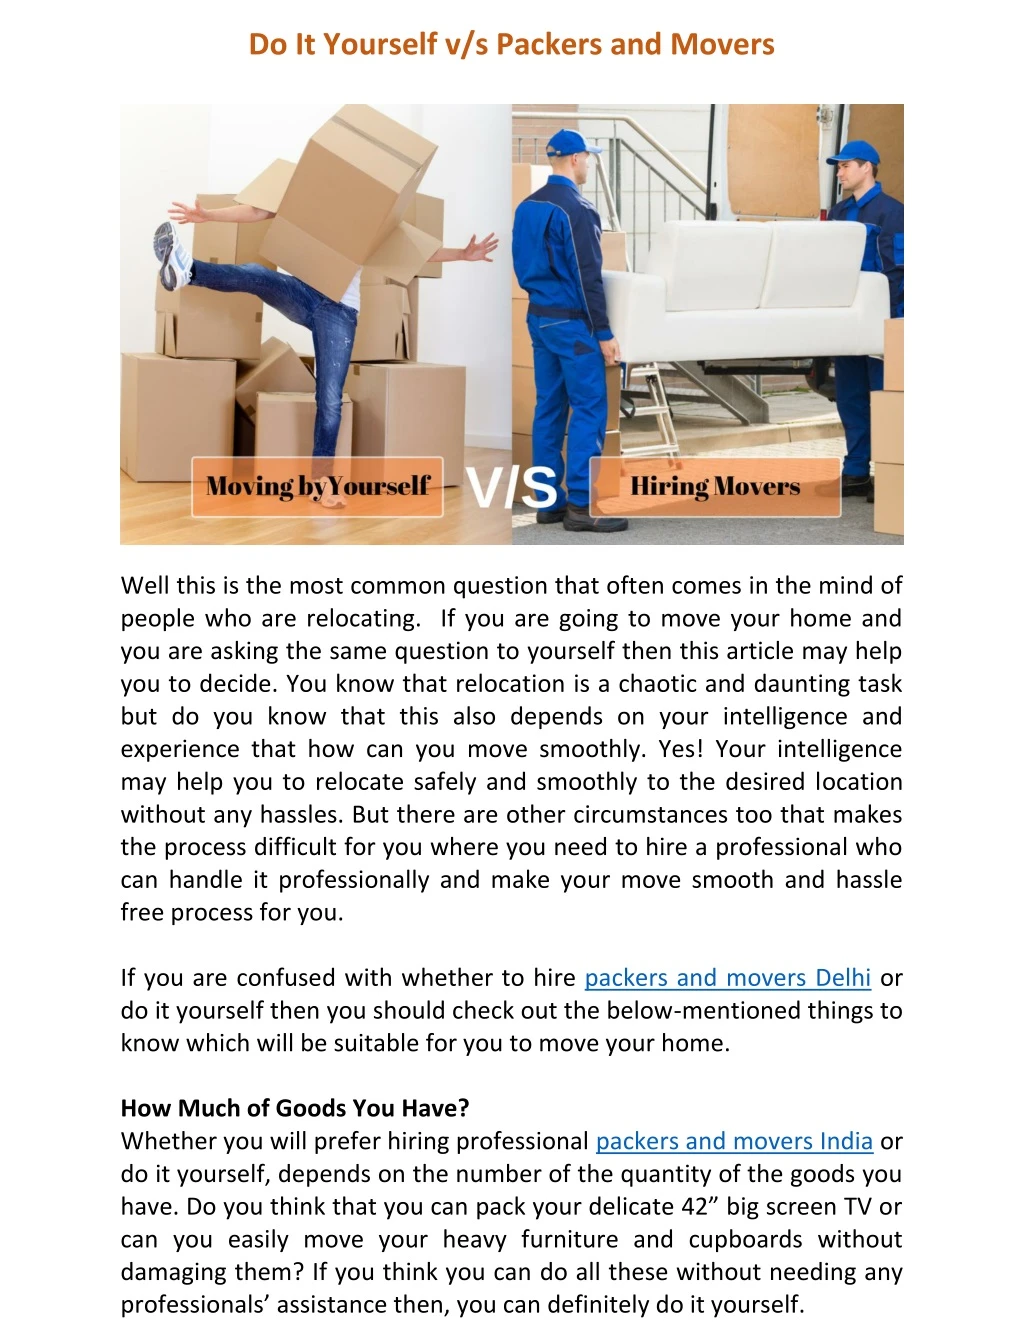 do it yourself v s packers and movers